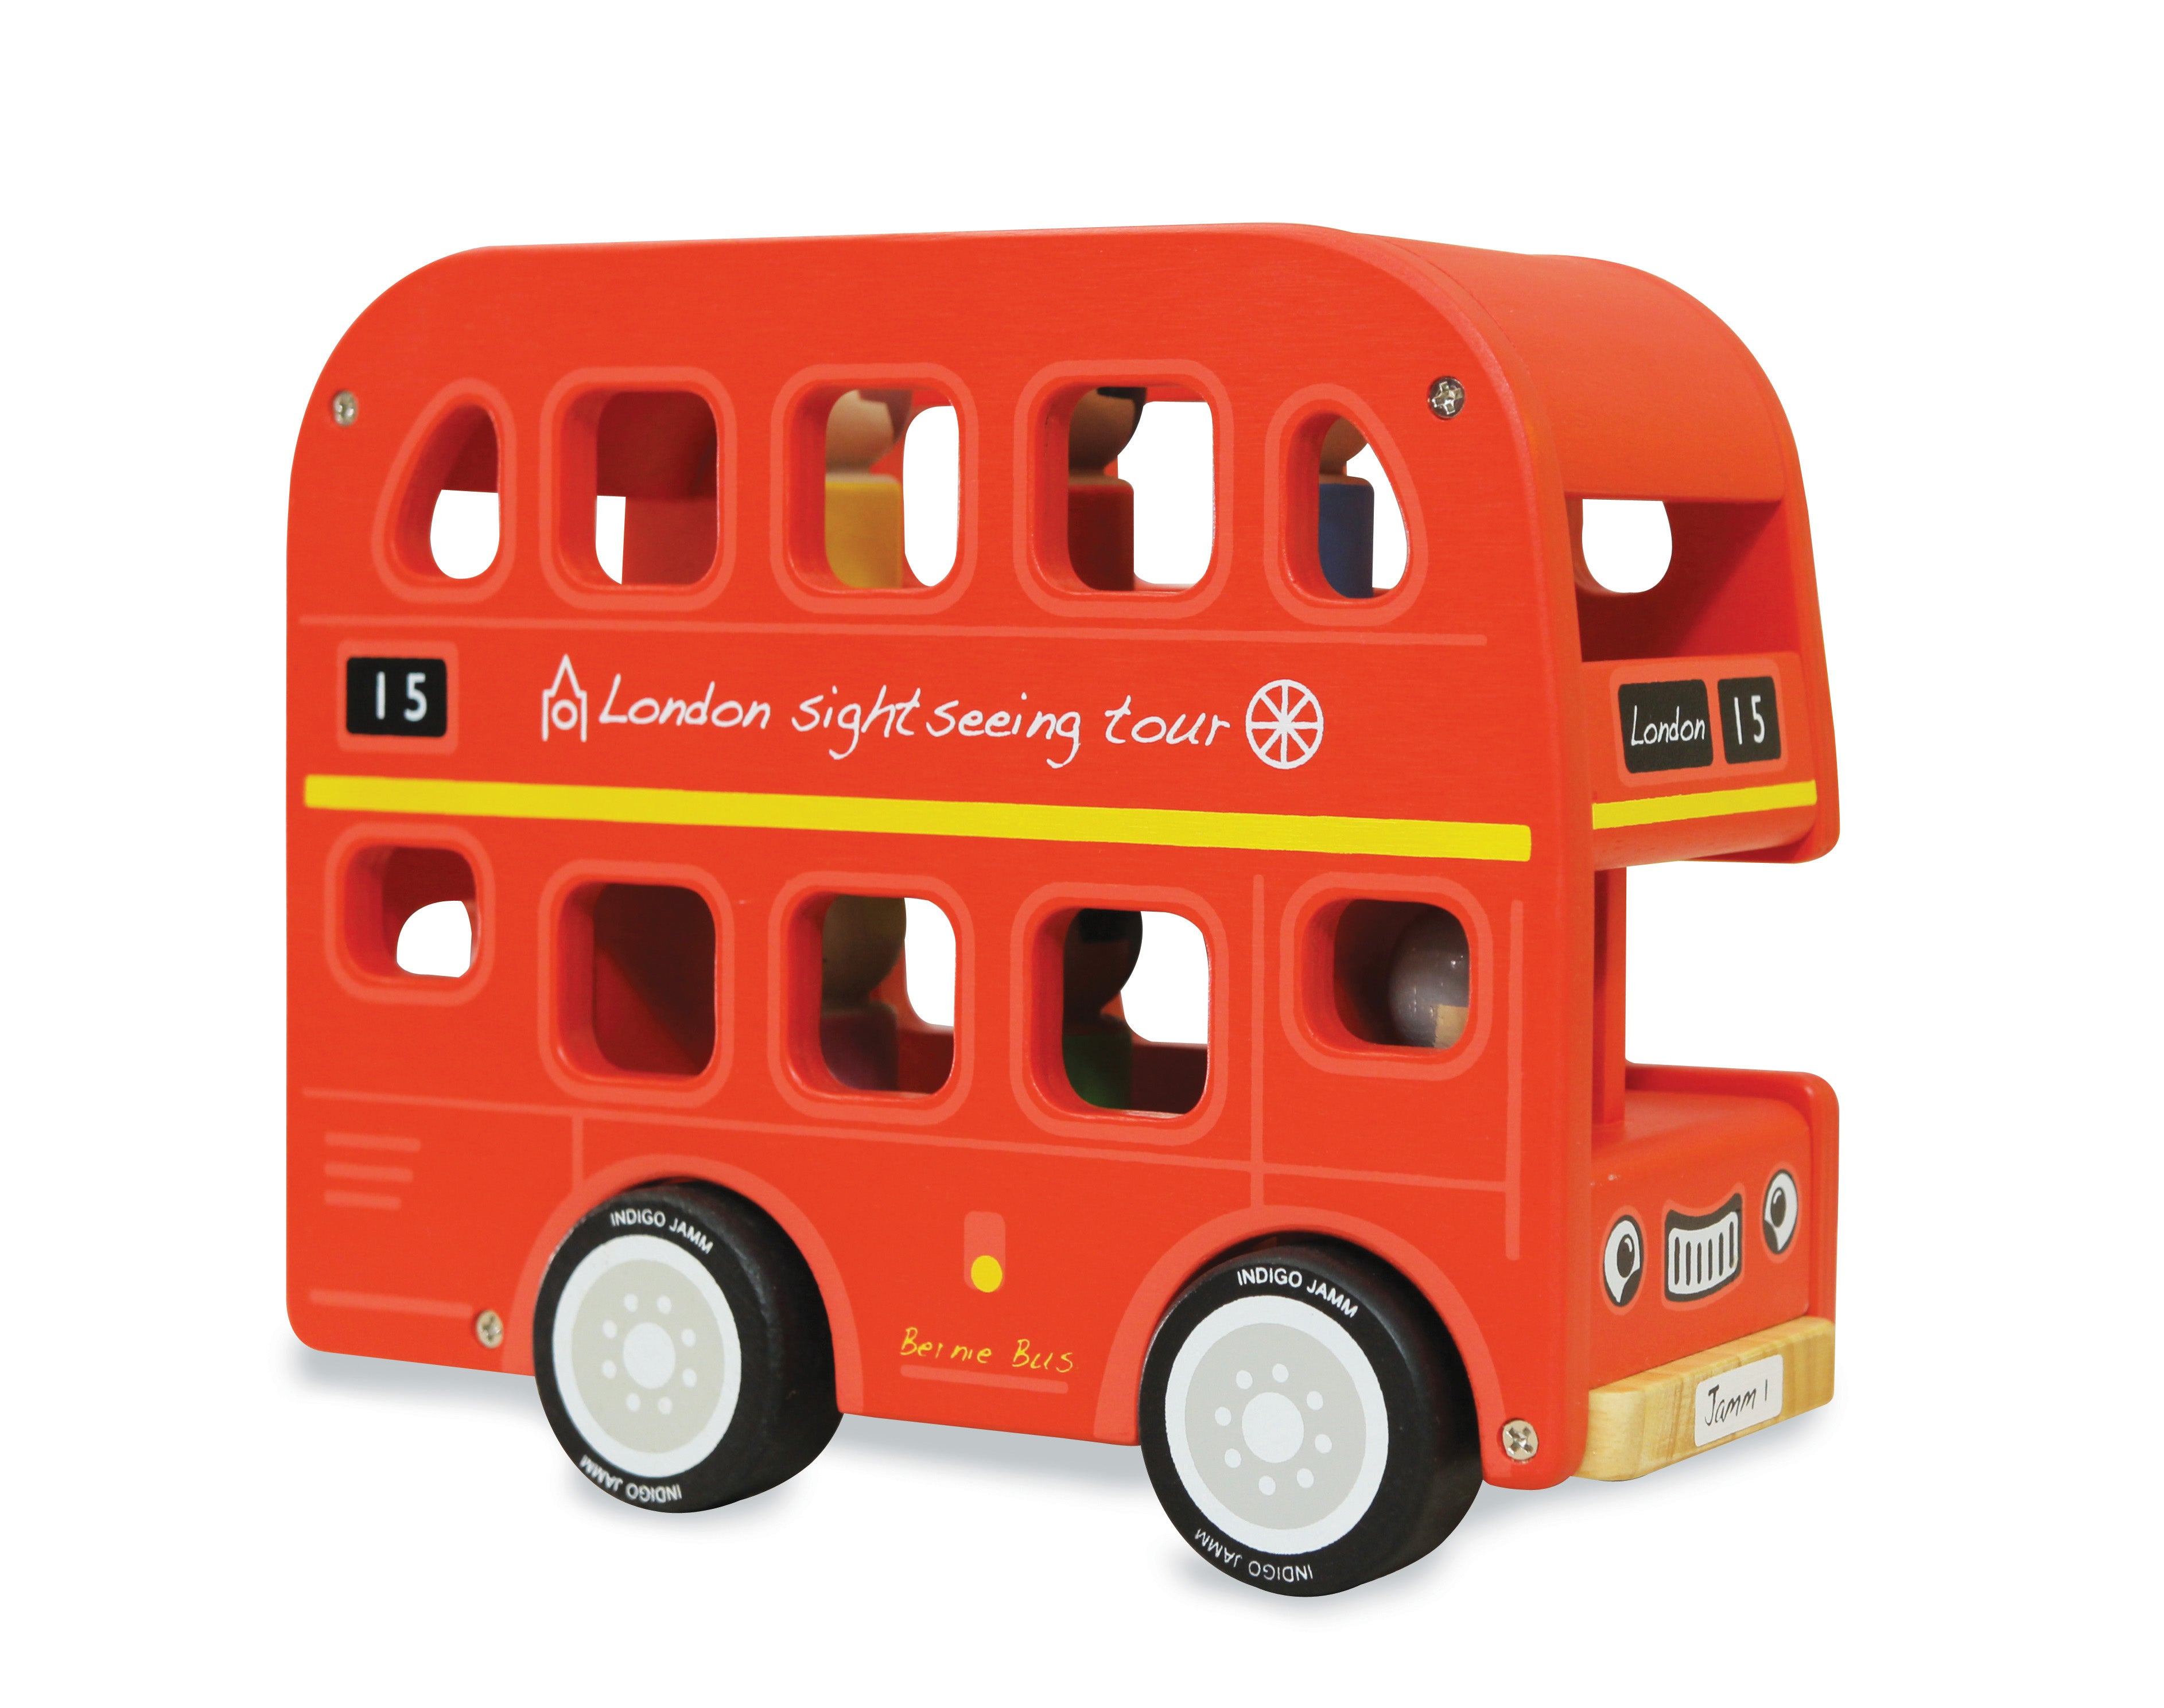 toy wooden bus